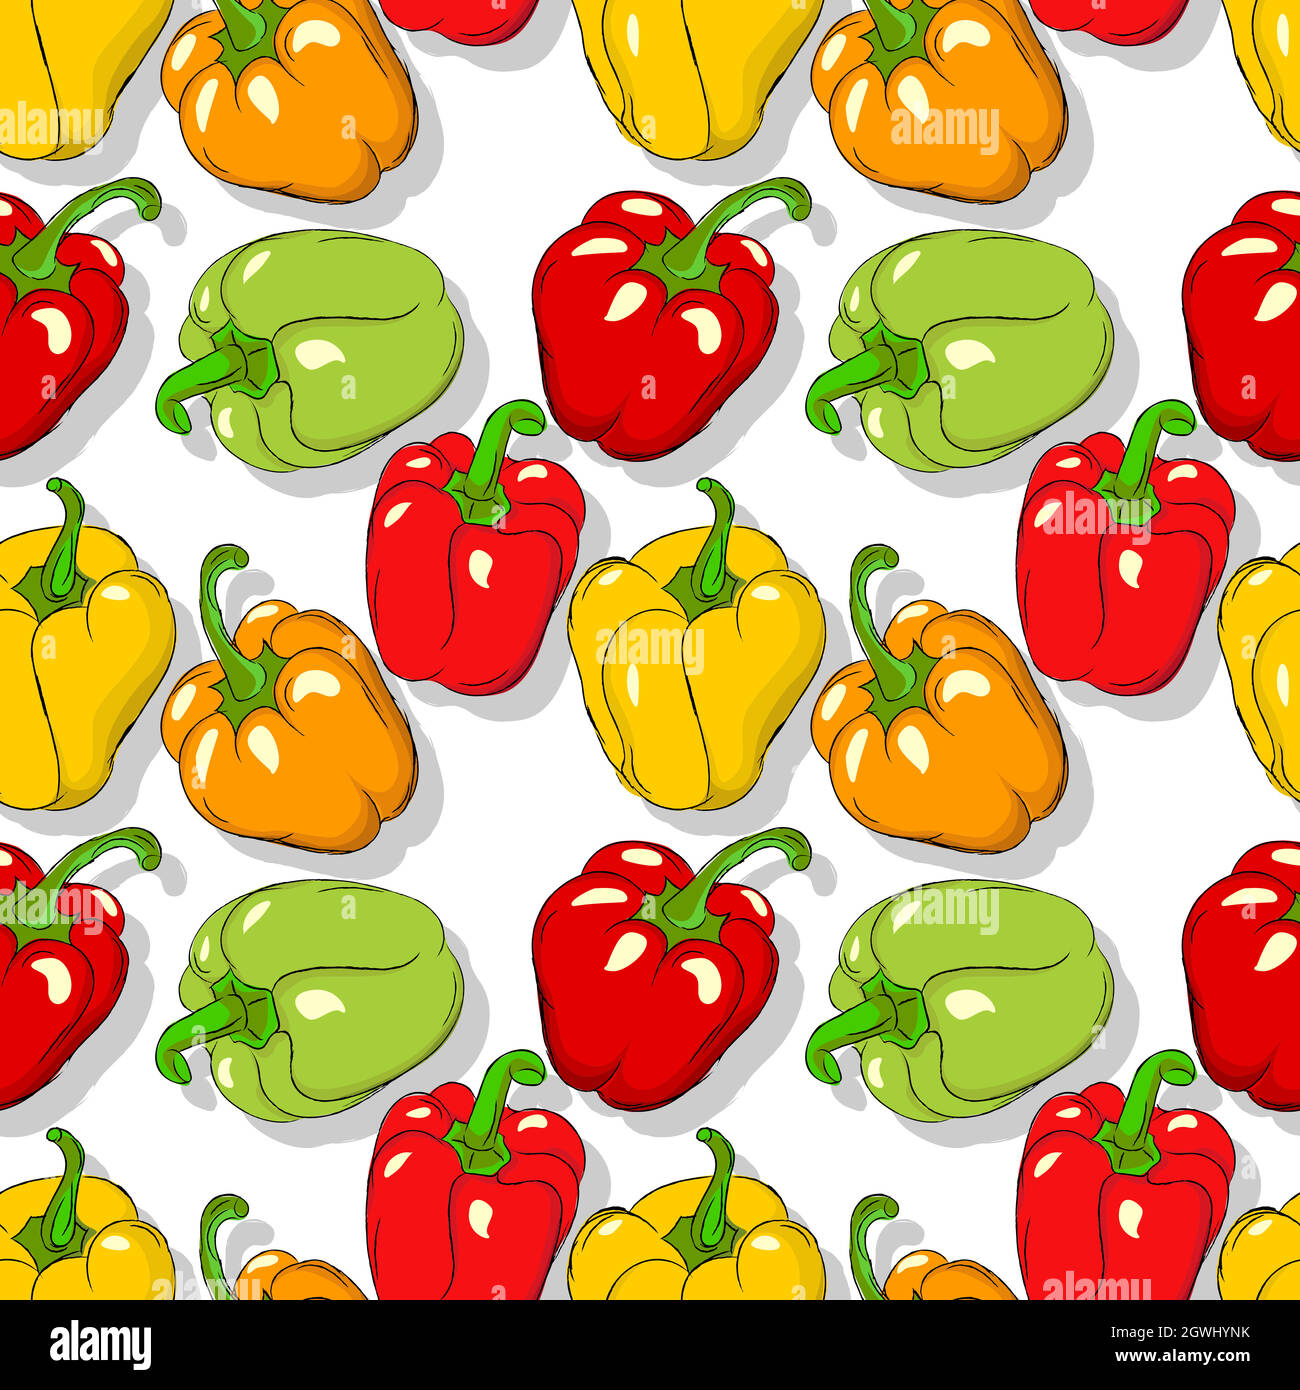 Bell peppers repeating pattern Stock Vector